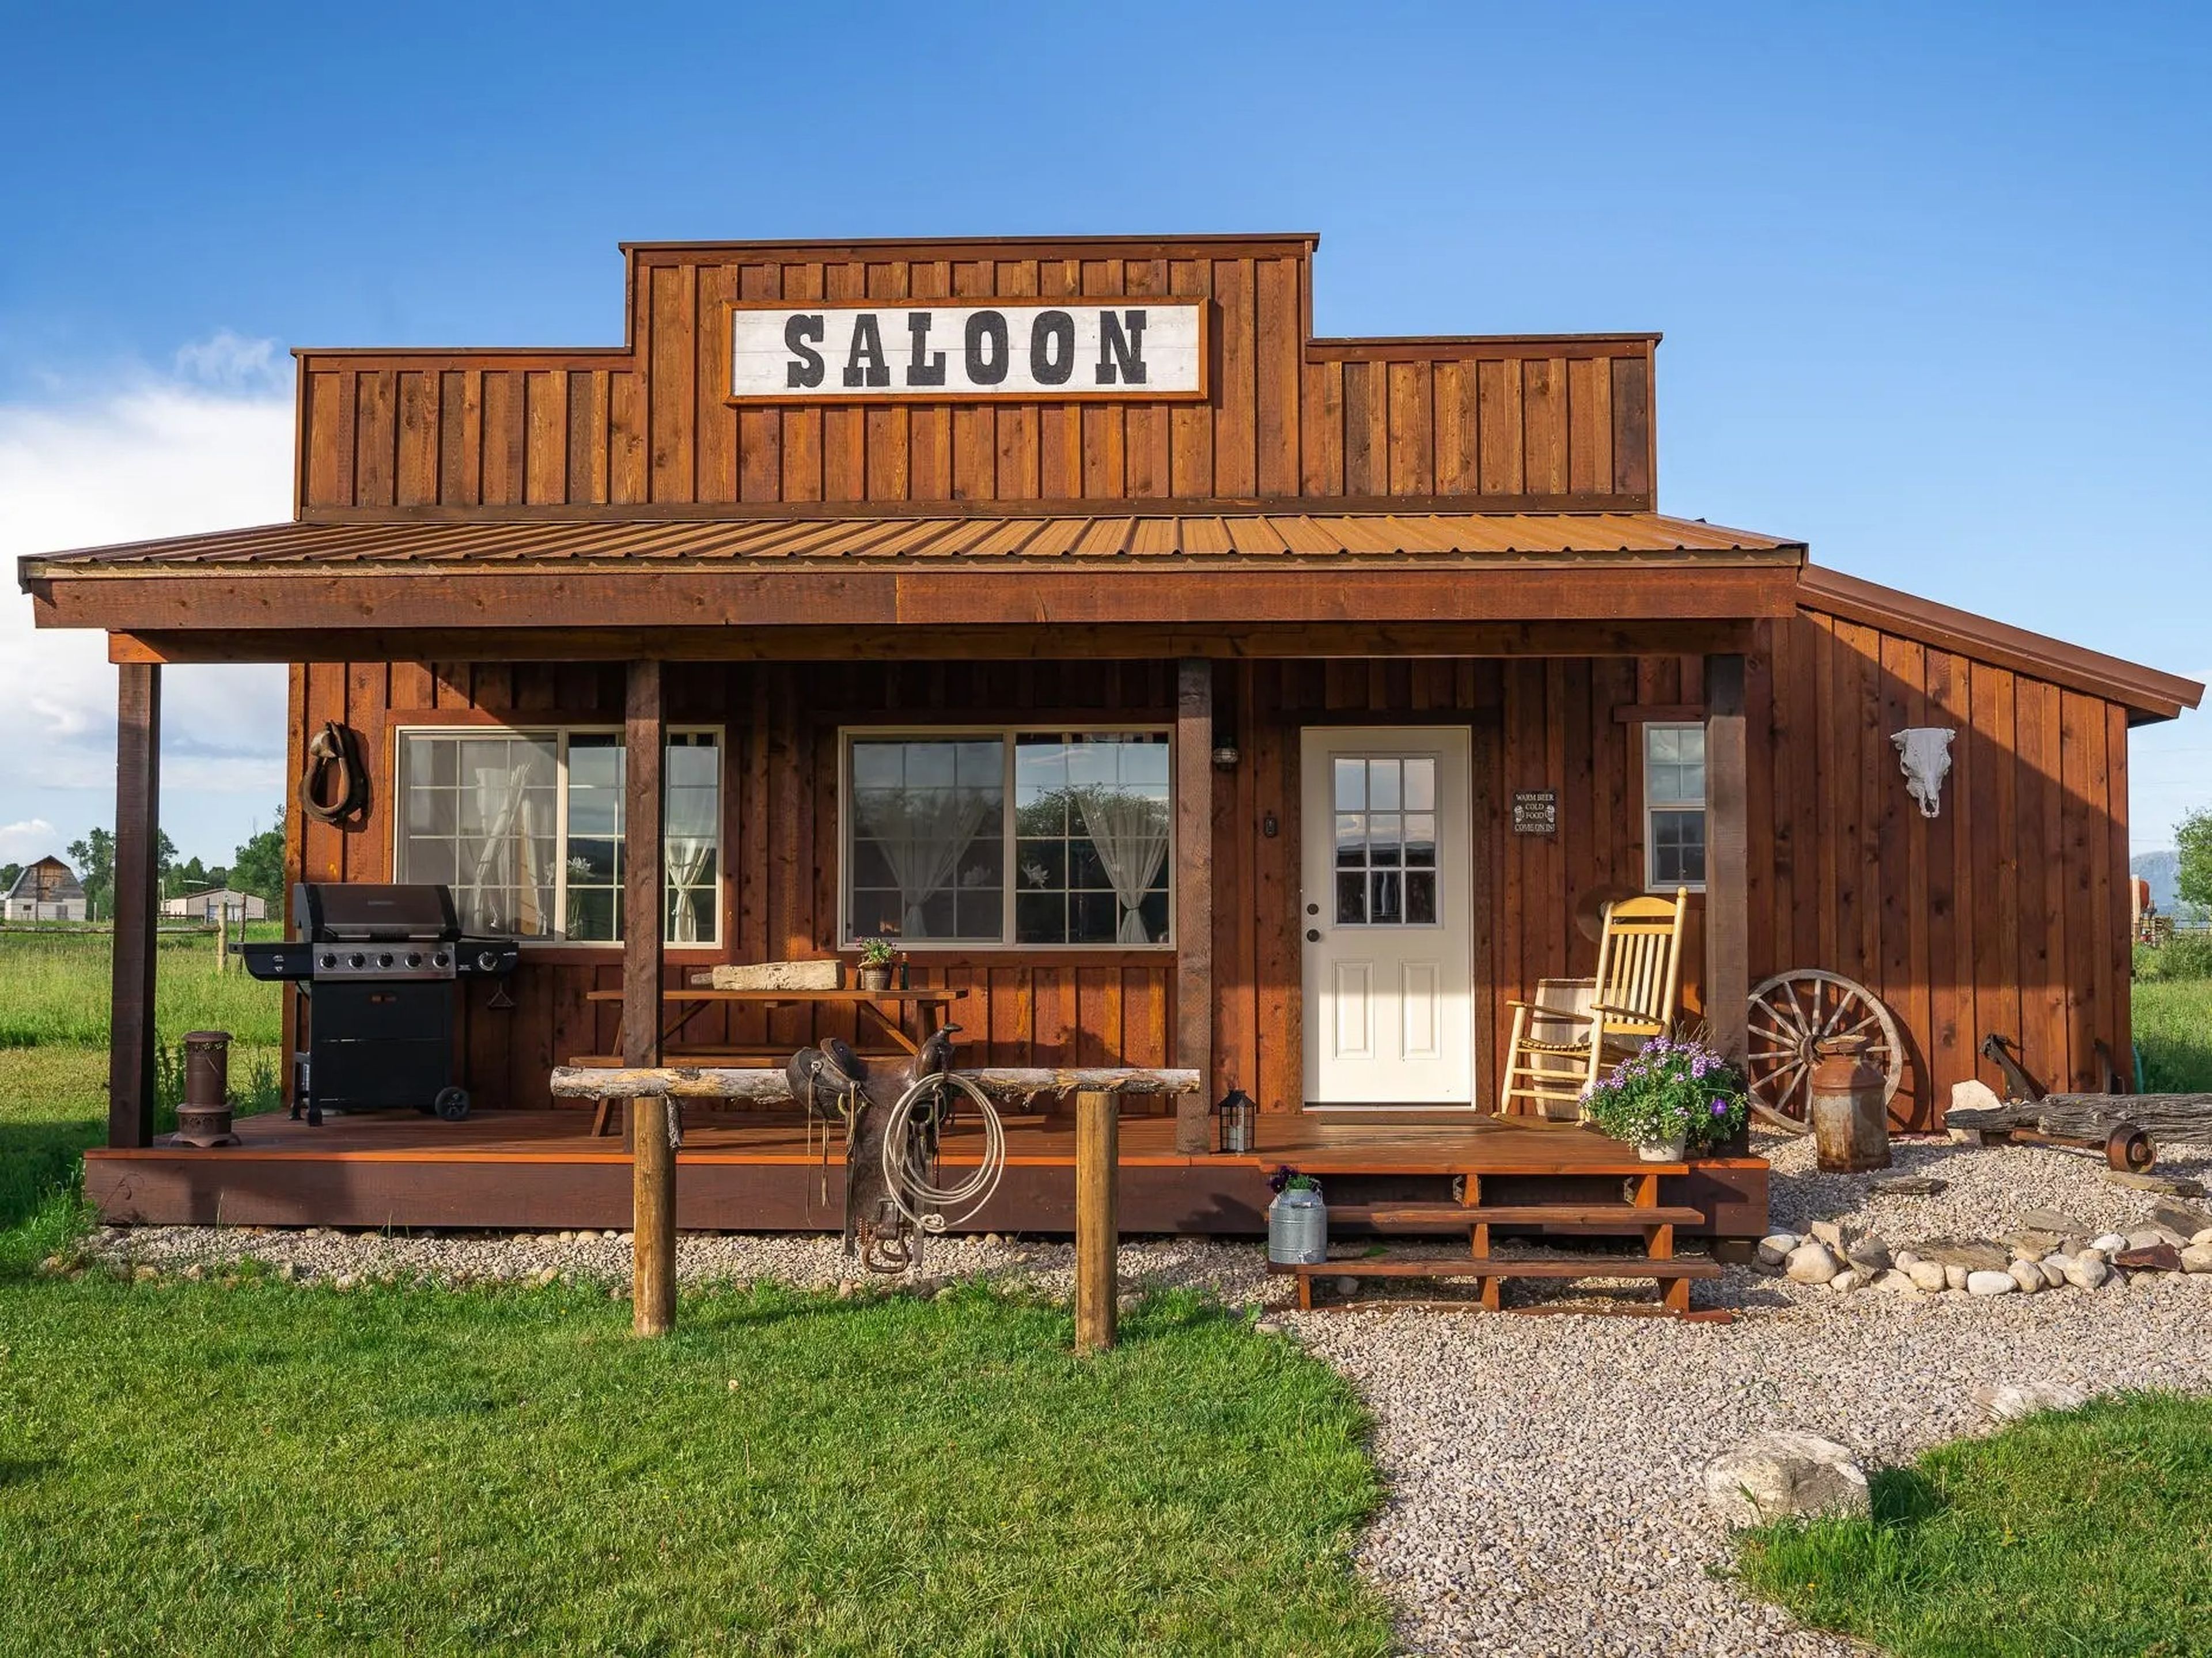 An image of the Western saloon during the day.